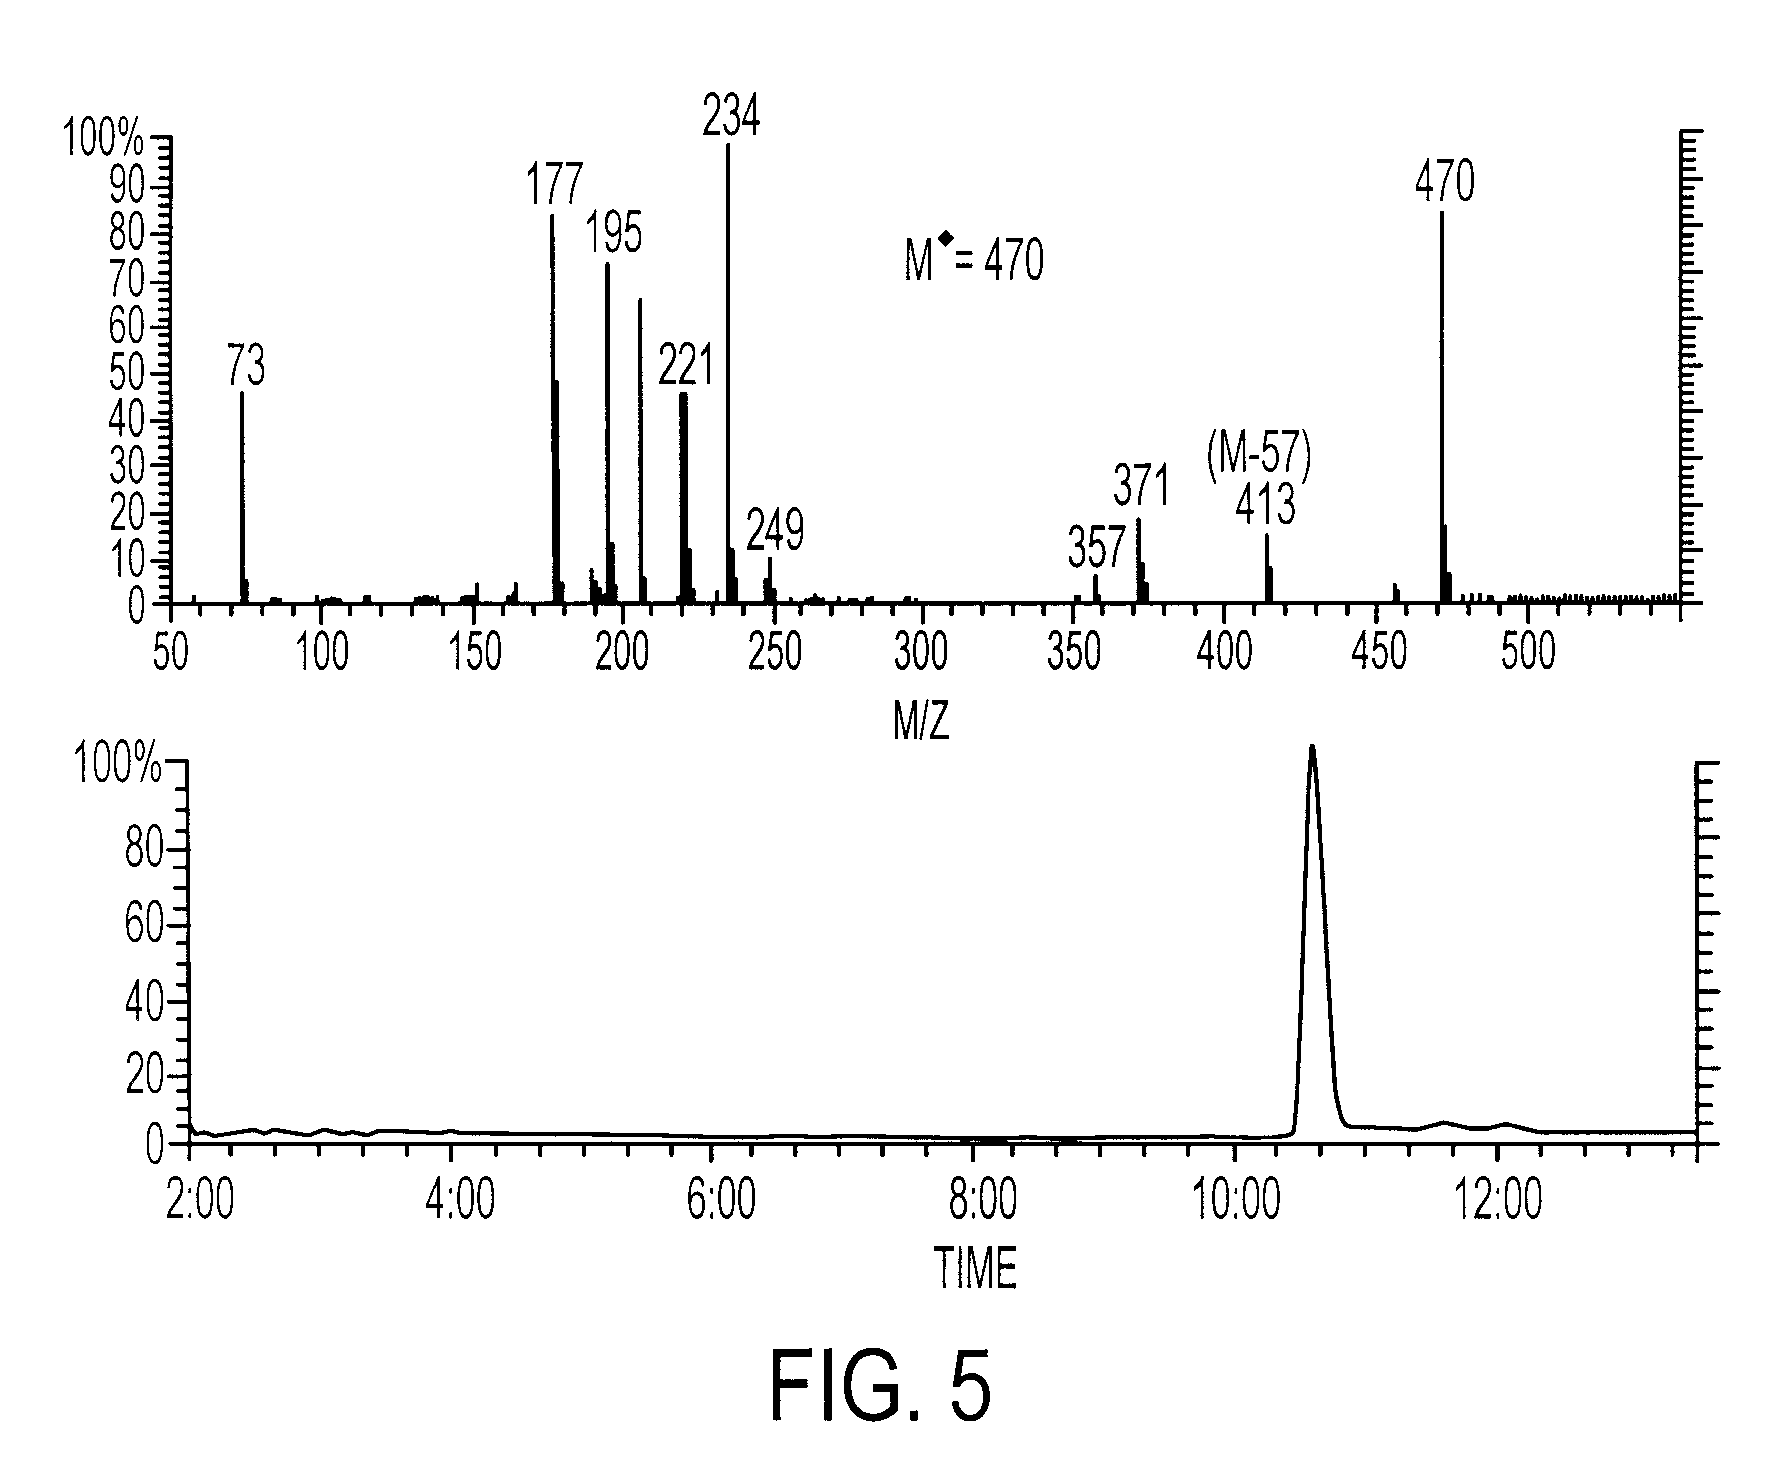 Compositions and products containing s-equol, and methods for their making